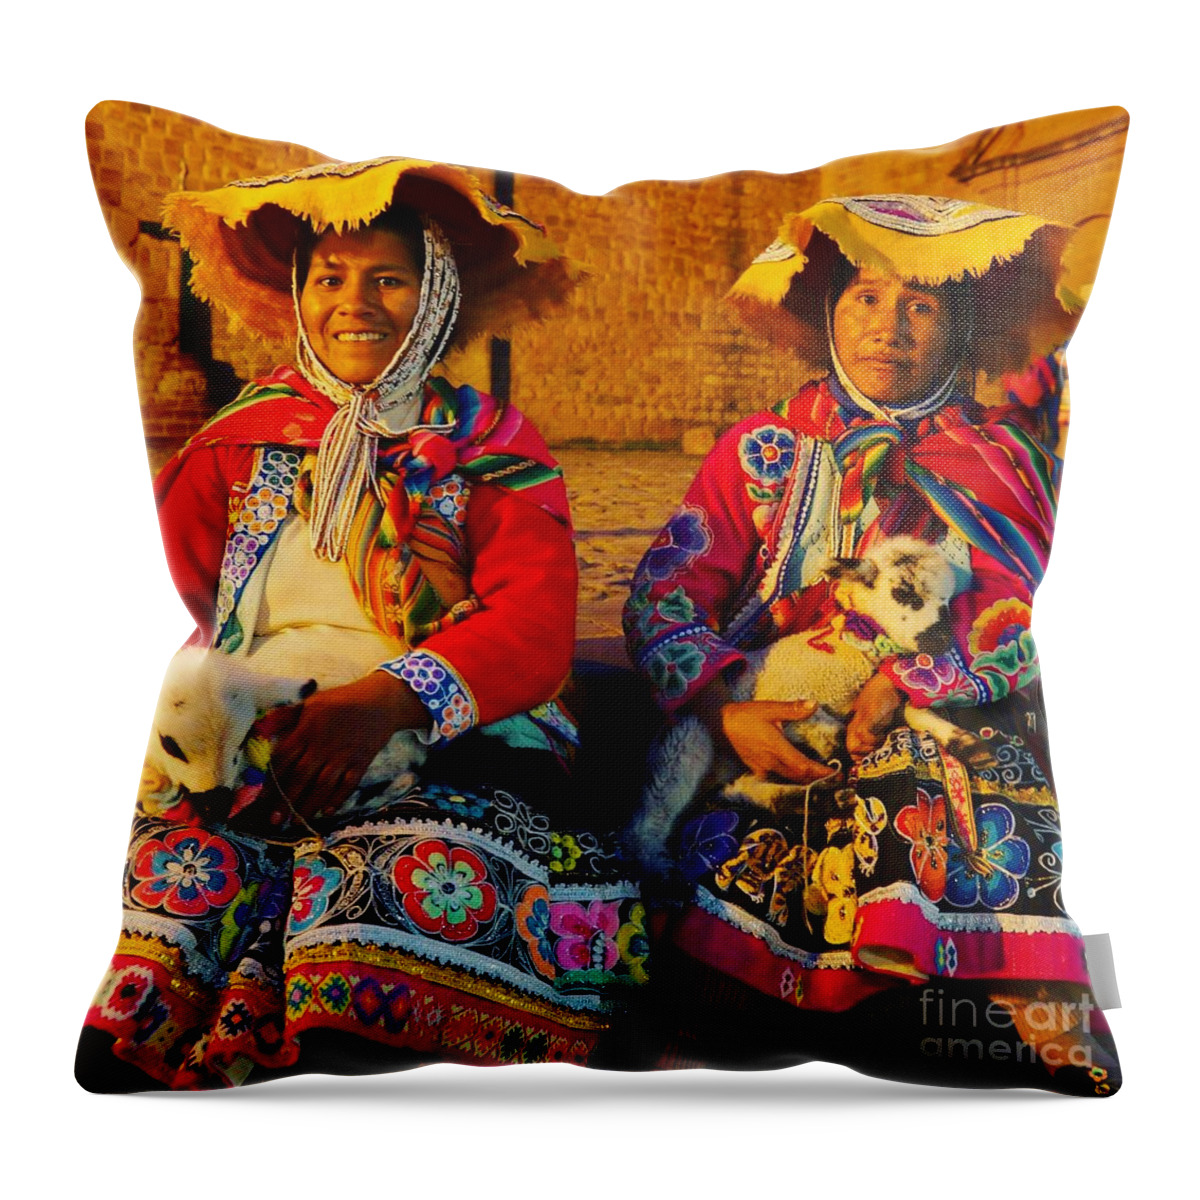  Throw Pillow featuring the photograph Girlfriends by Reena Kapoor